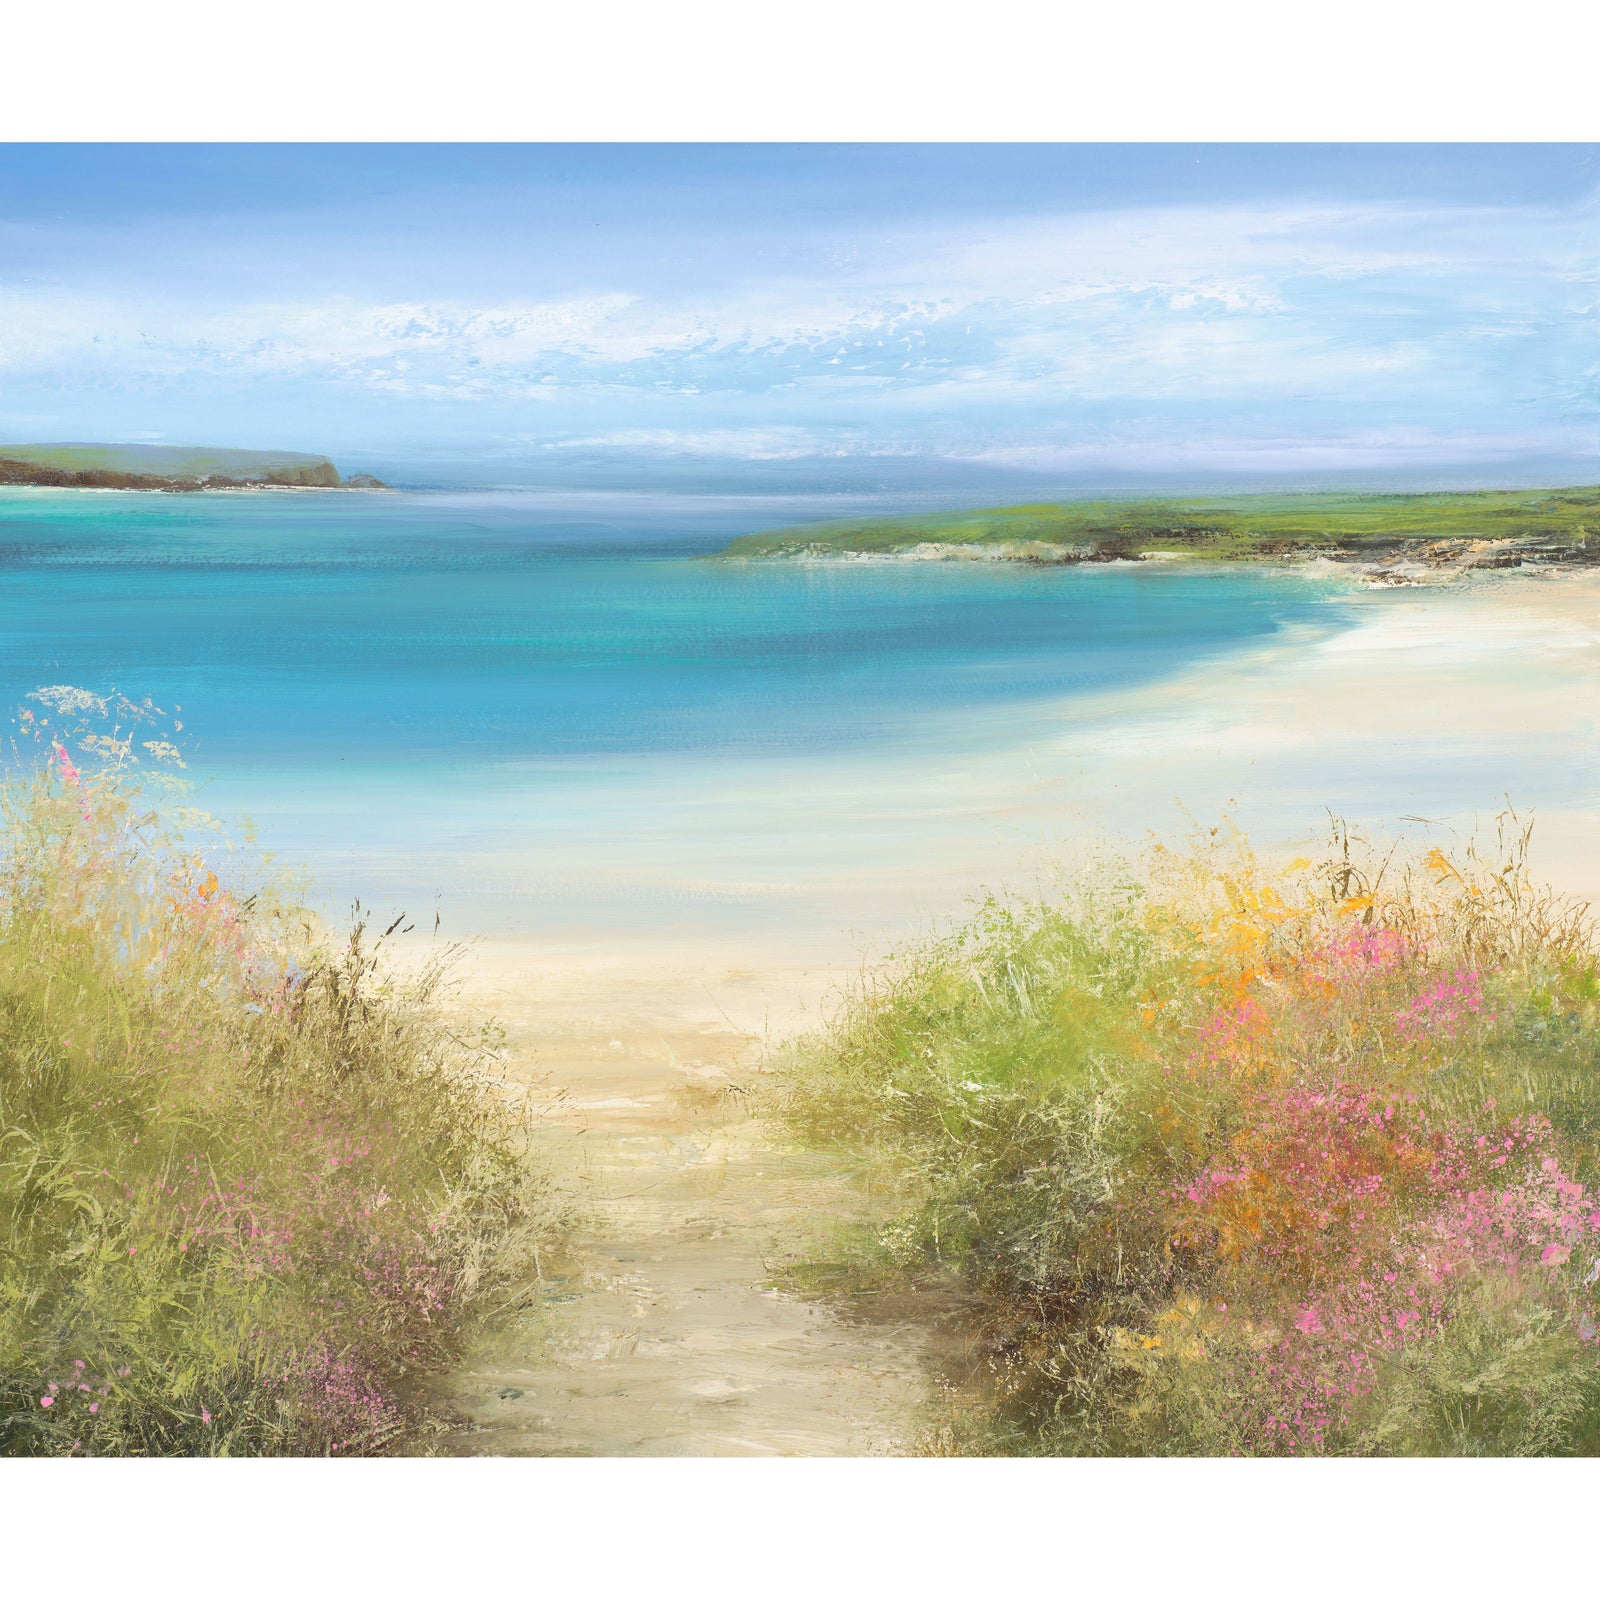 'A Turquoise Tide At Daymer Bay' oil on paper original by Amanda Hoskin, available at Padstow Gallery, Cornwall